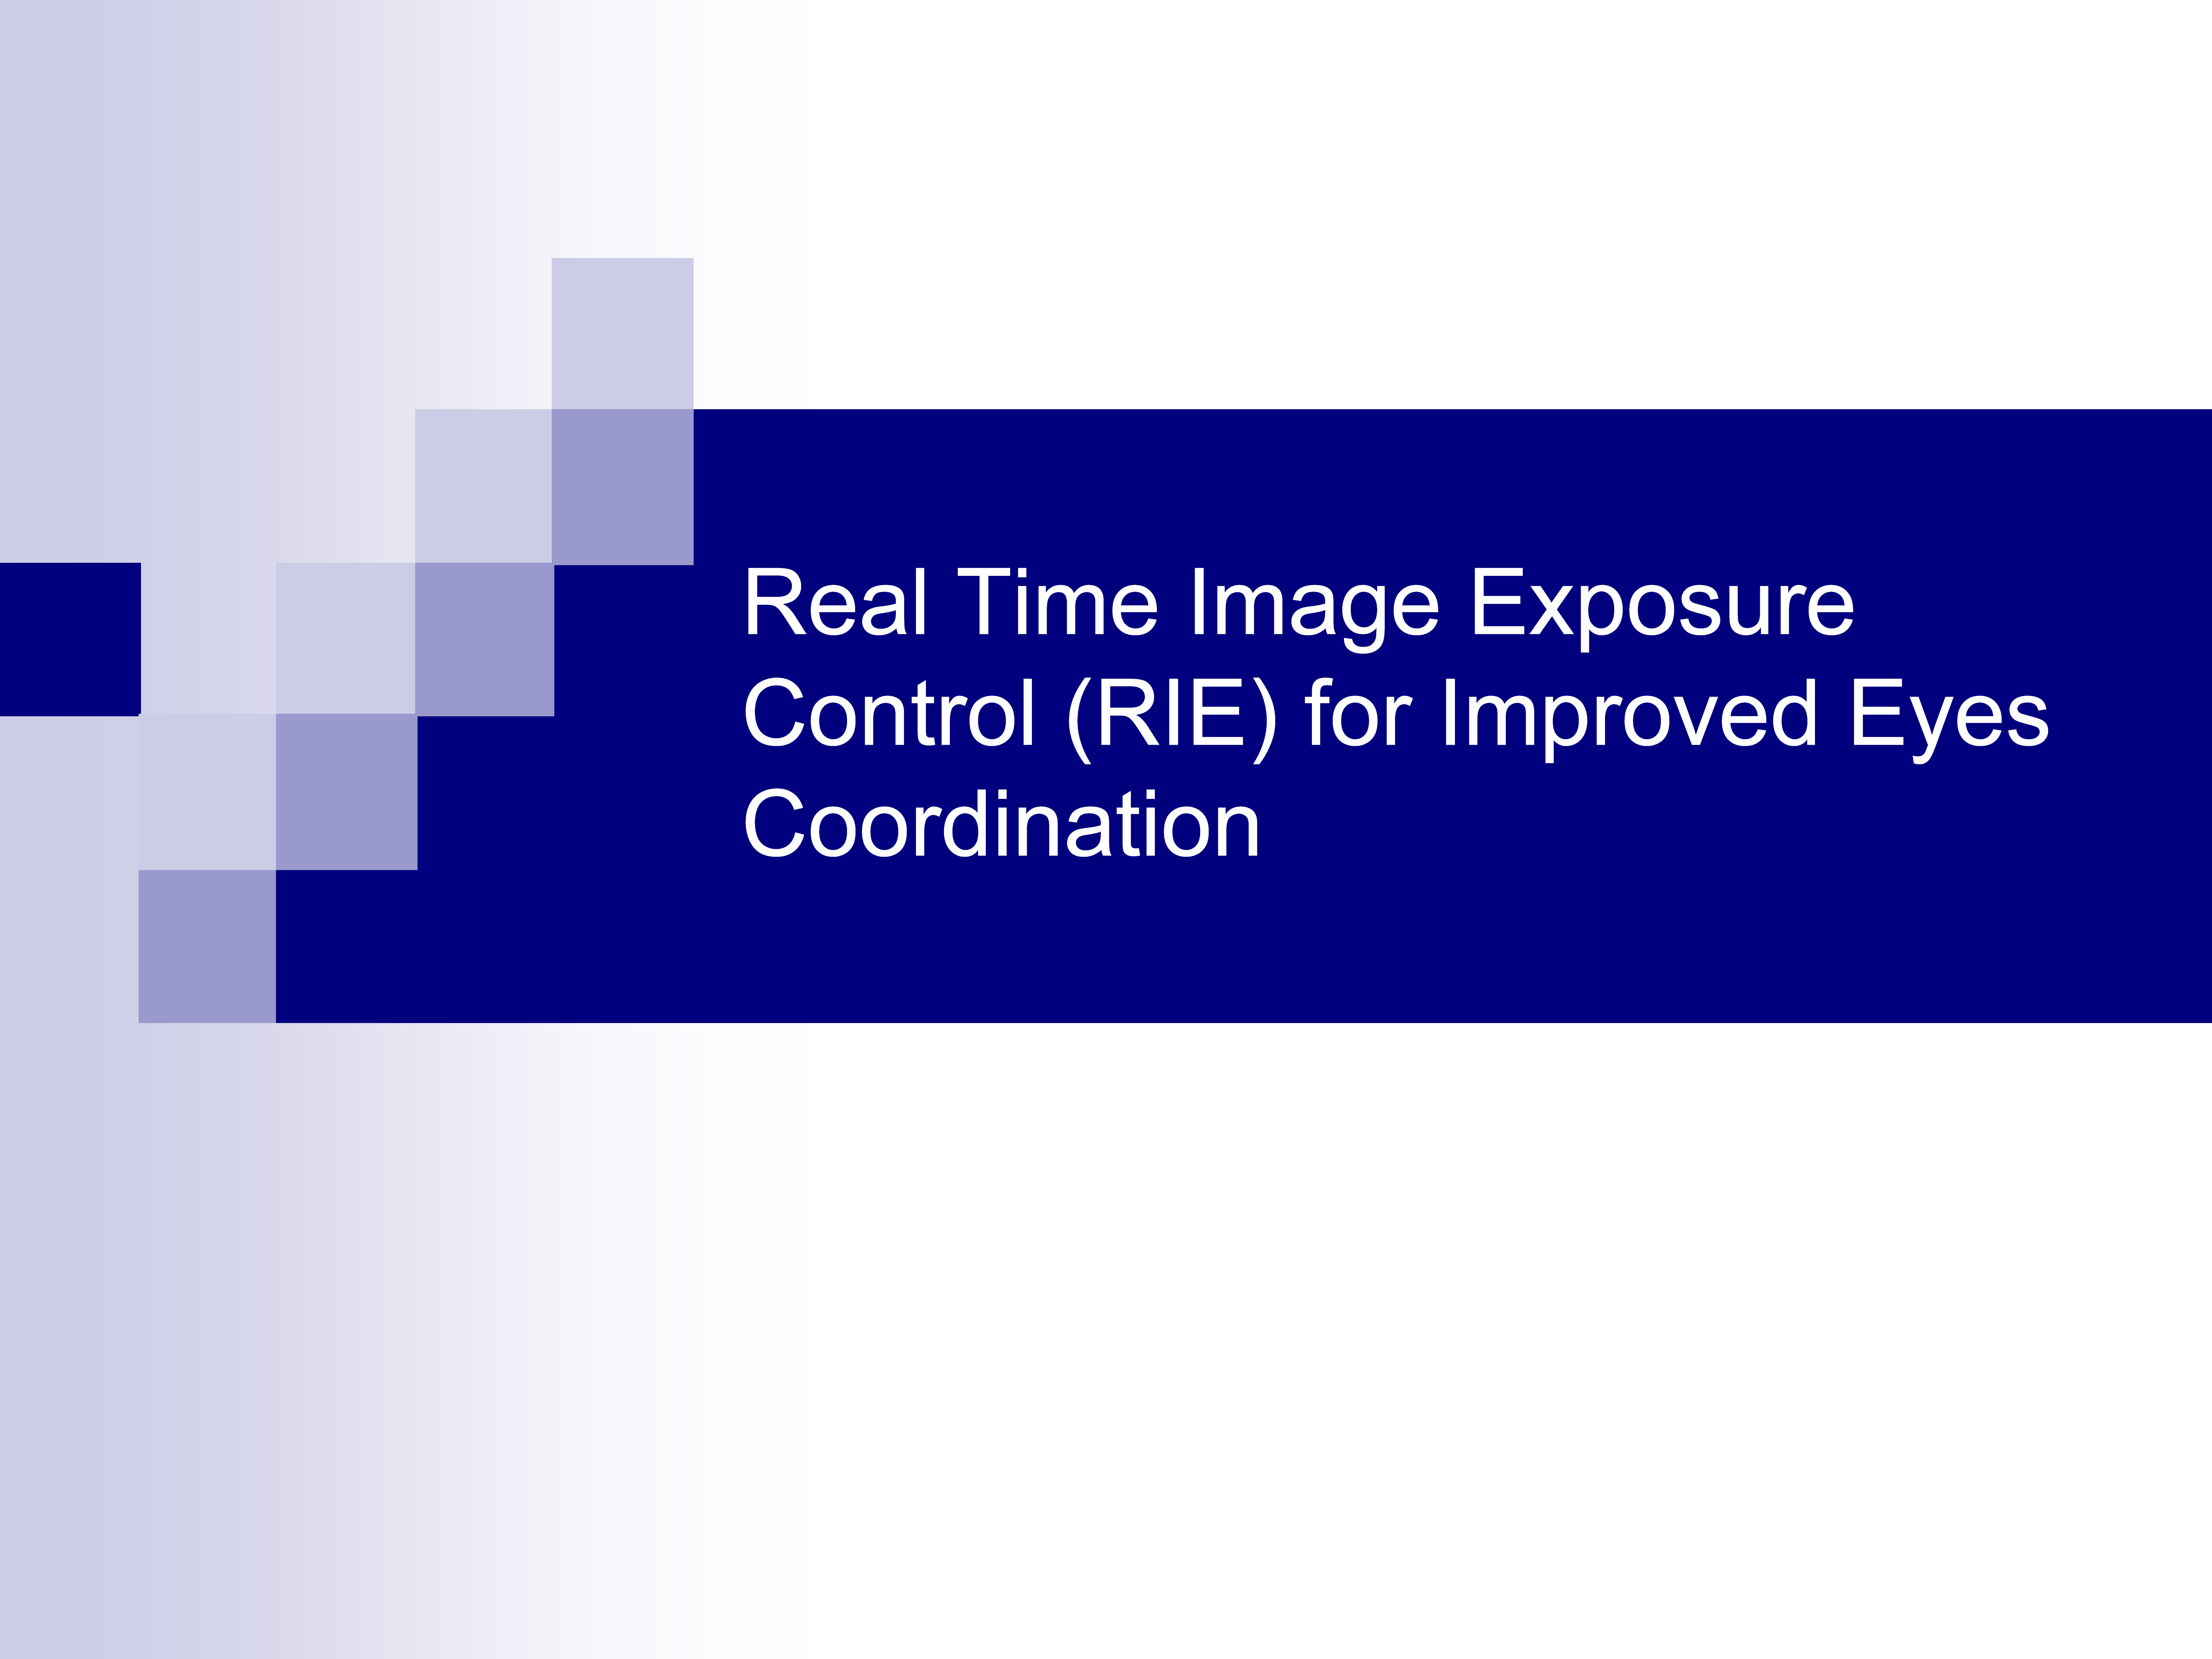 Real Time Image Exposure Control (RIE) for Improved Eyes Coordination